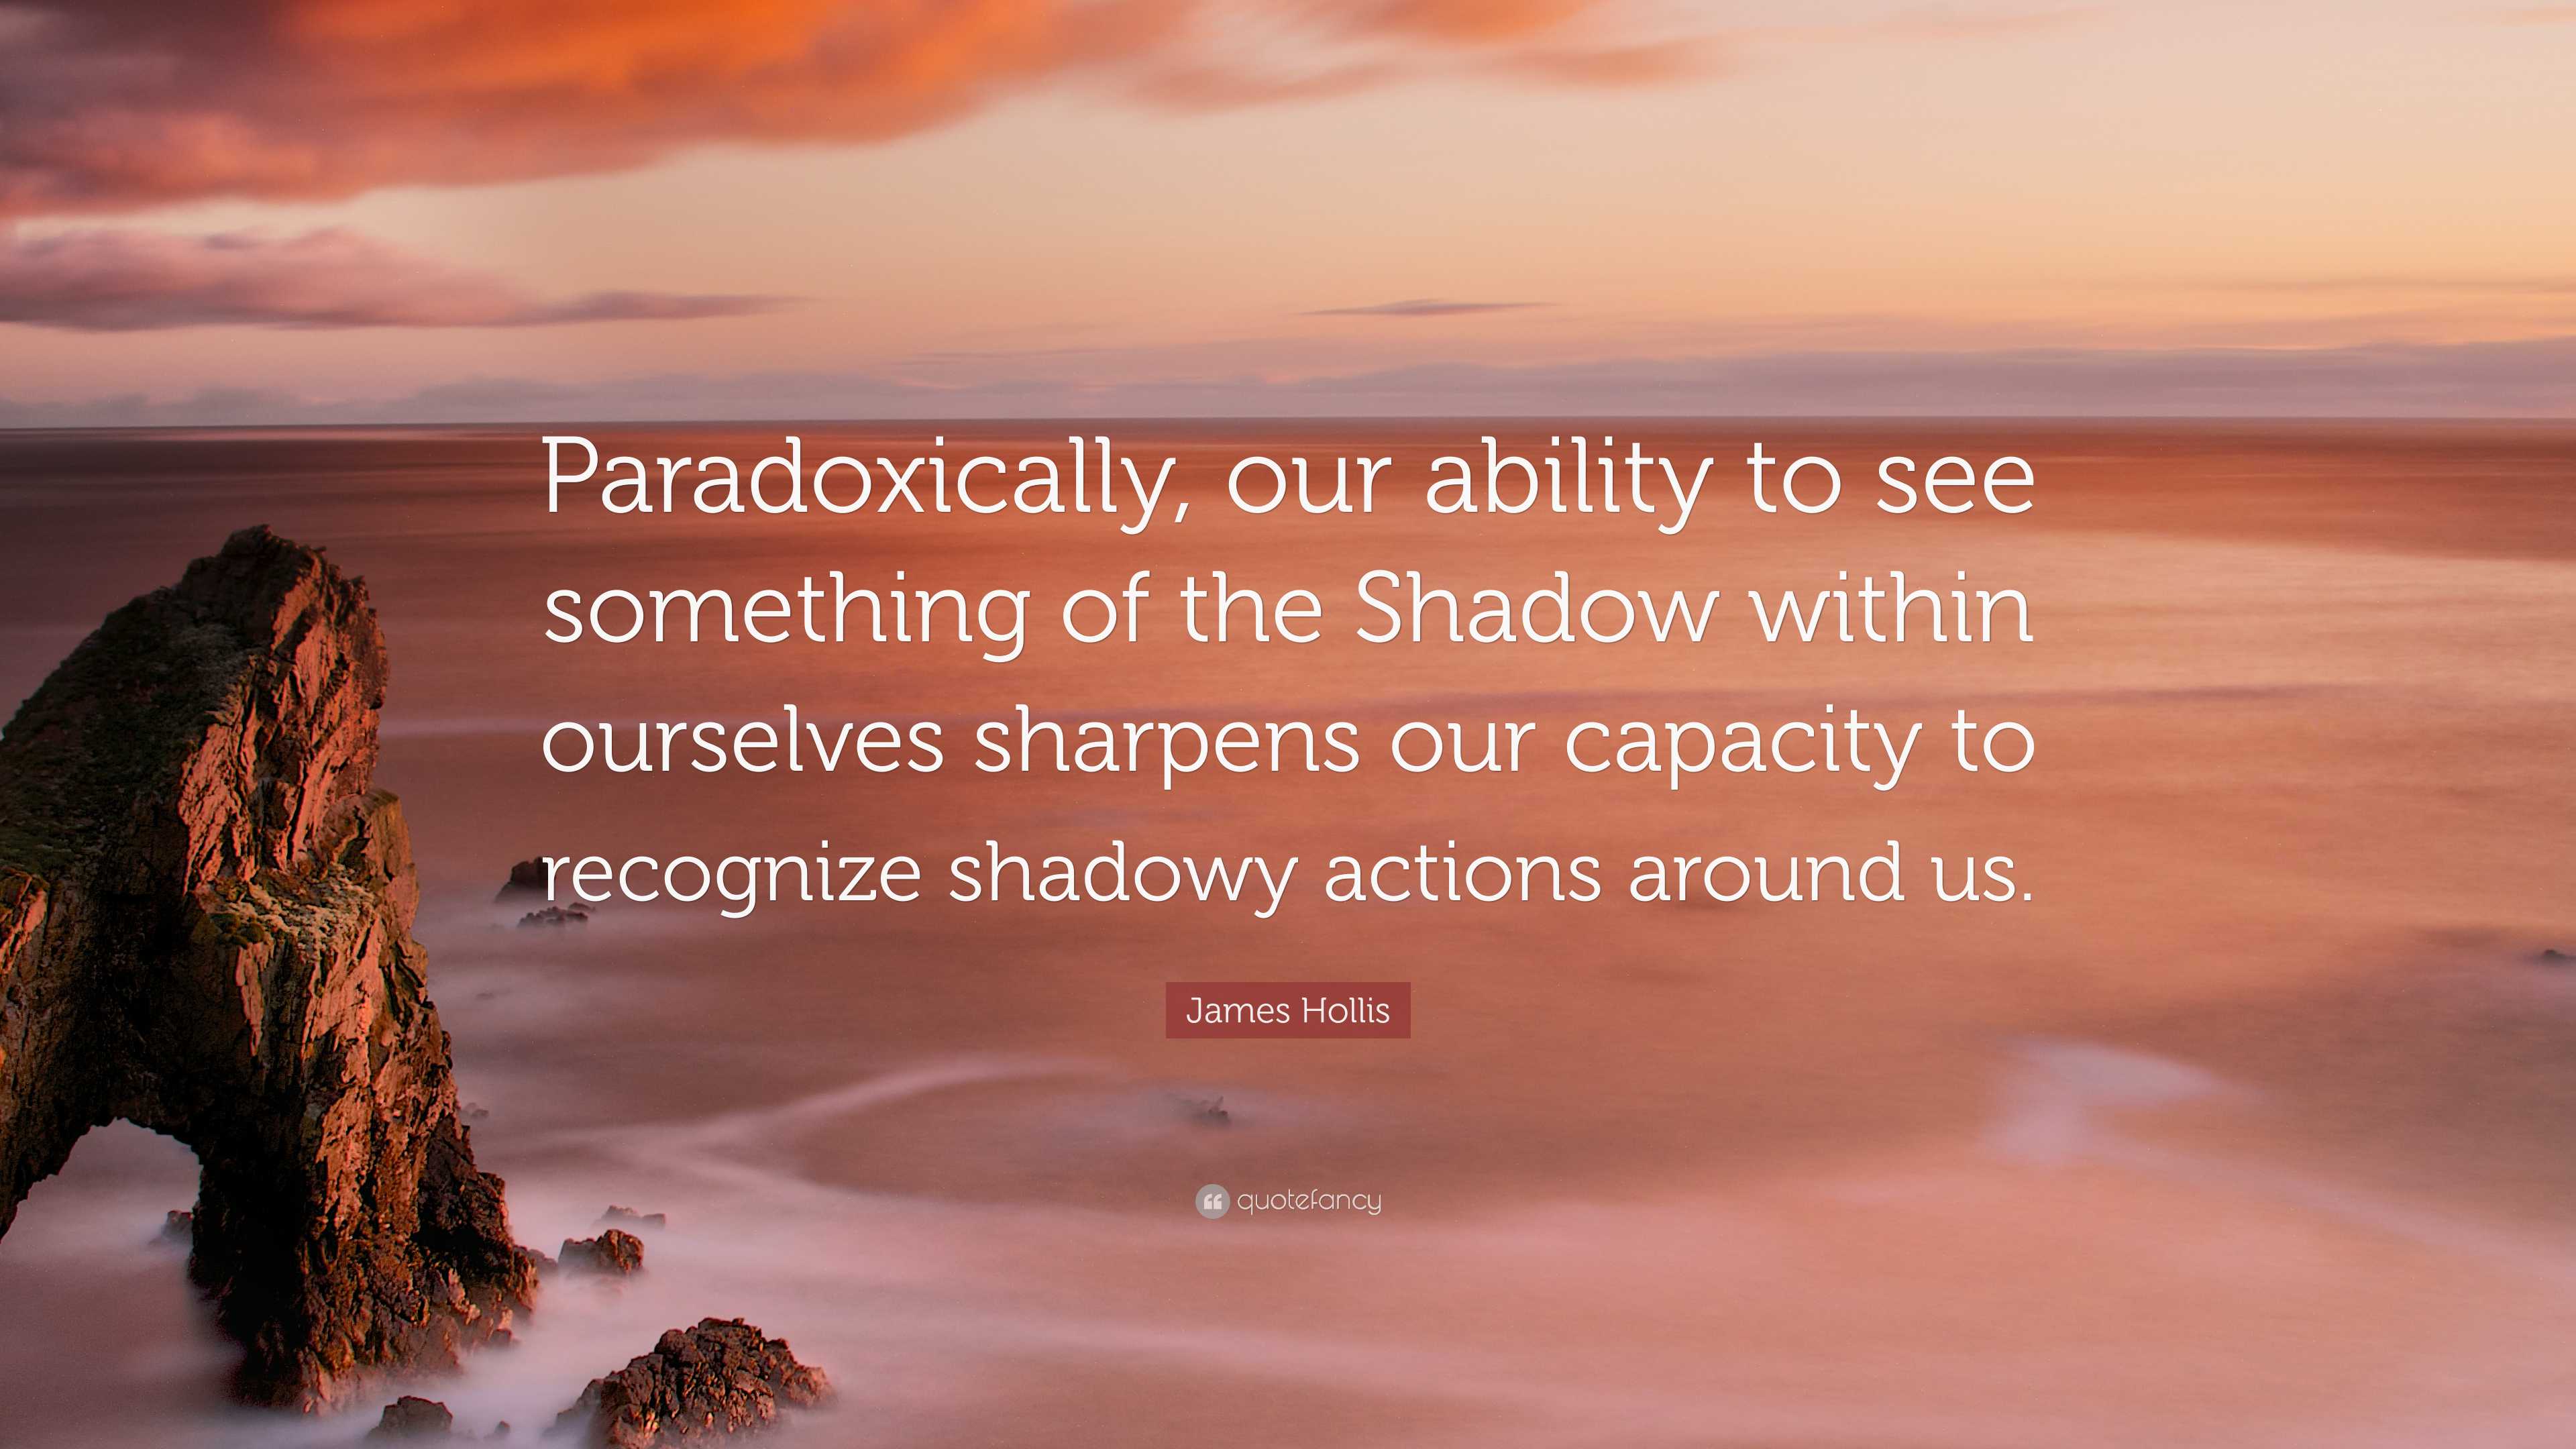 James Hollis Quote: “Paradoxically, our ability to see something of the  Shadow within ourselves sharpens our capacity to recognize shadowy ac”